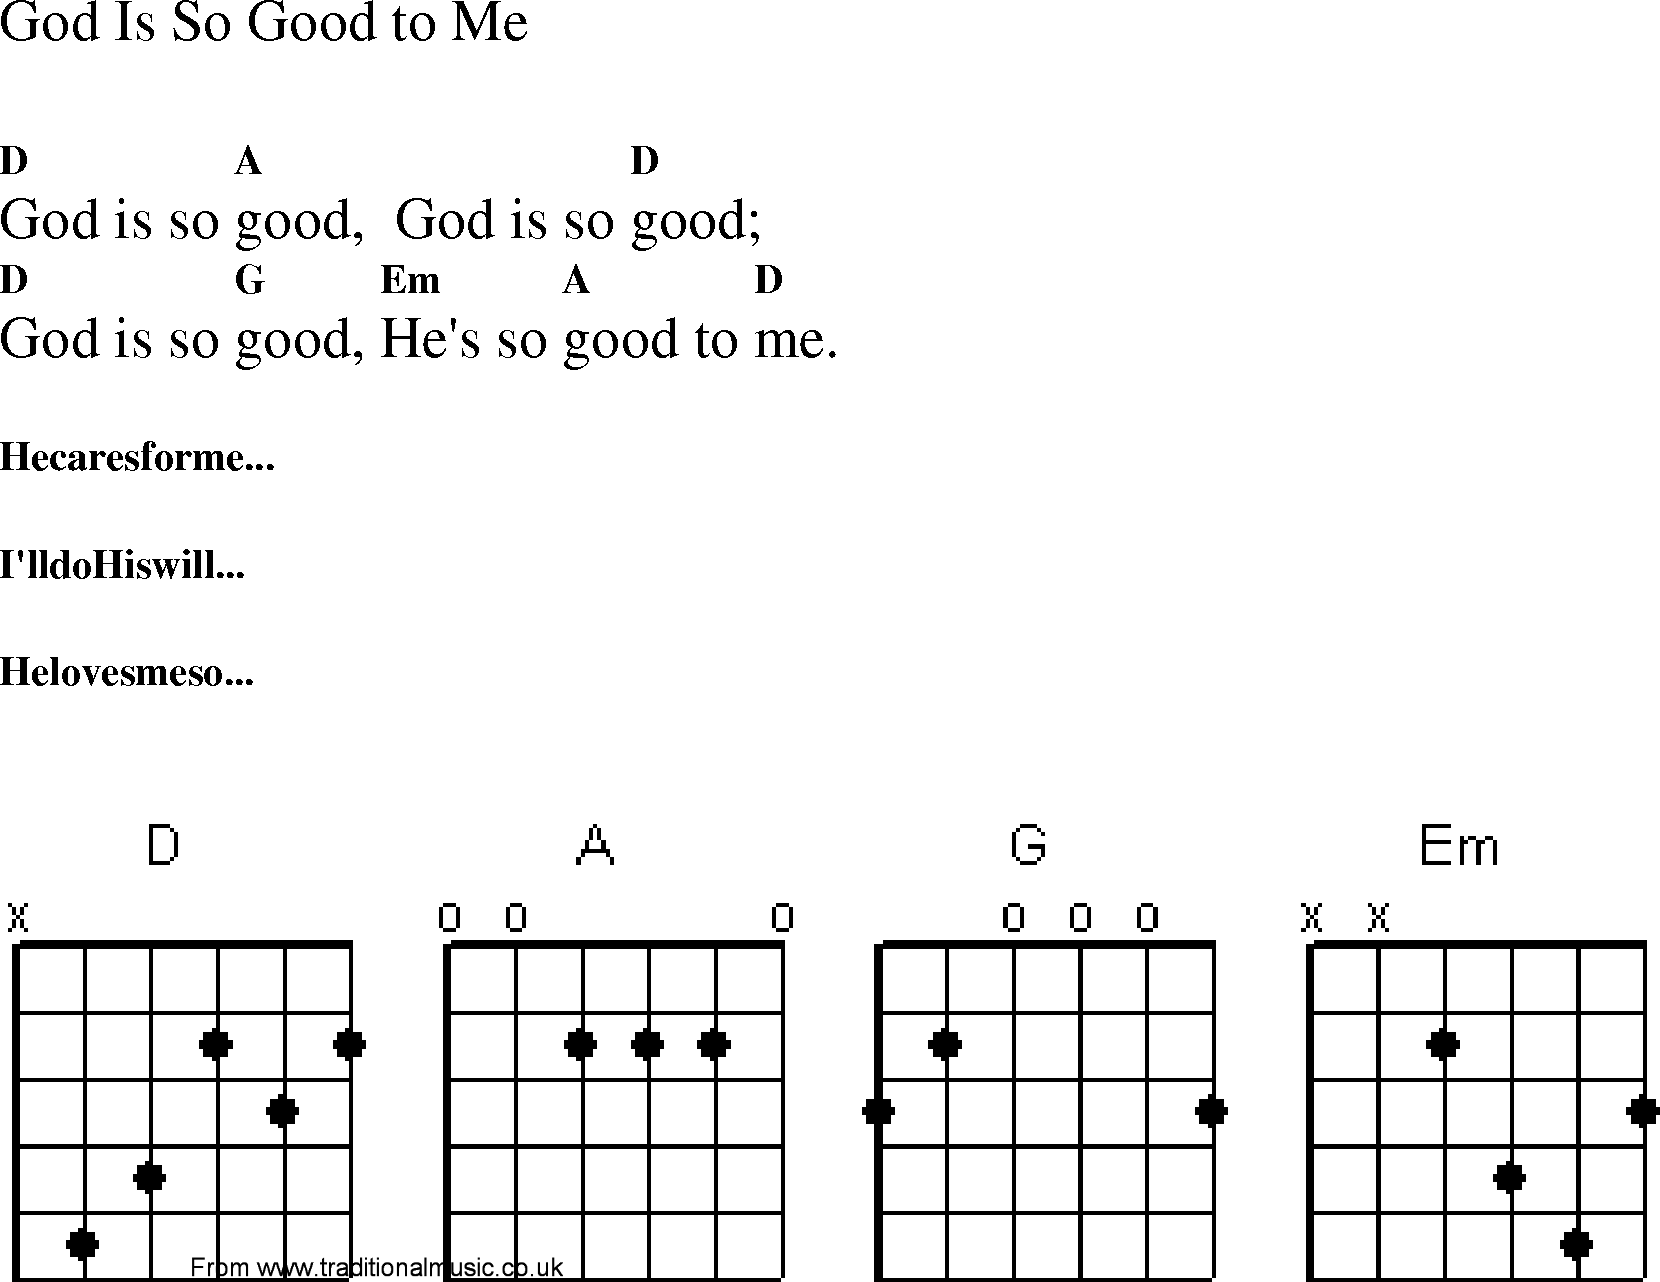 Gospel Song: god_is_so_good_to_me, lyrics and chords.